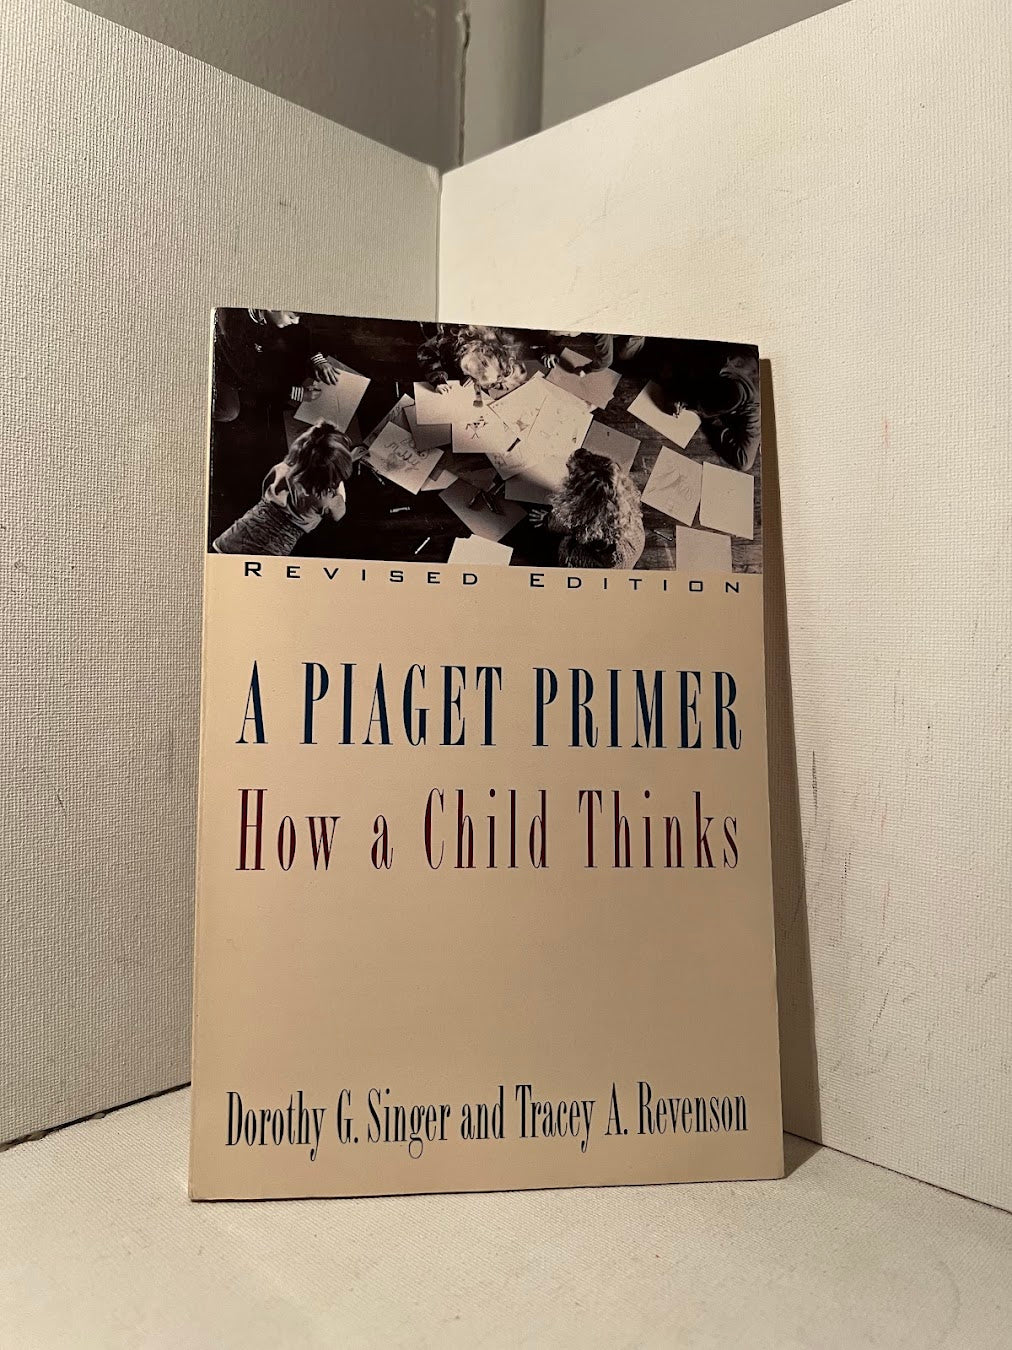 A Piaget Primer by Dorothy G. Singer and Tracey A. Revenson